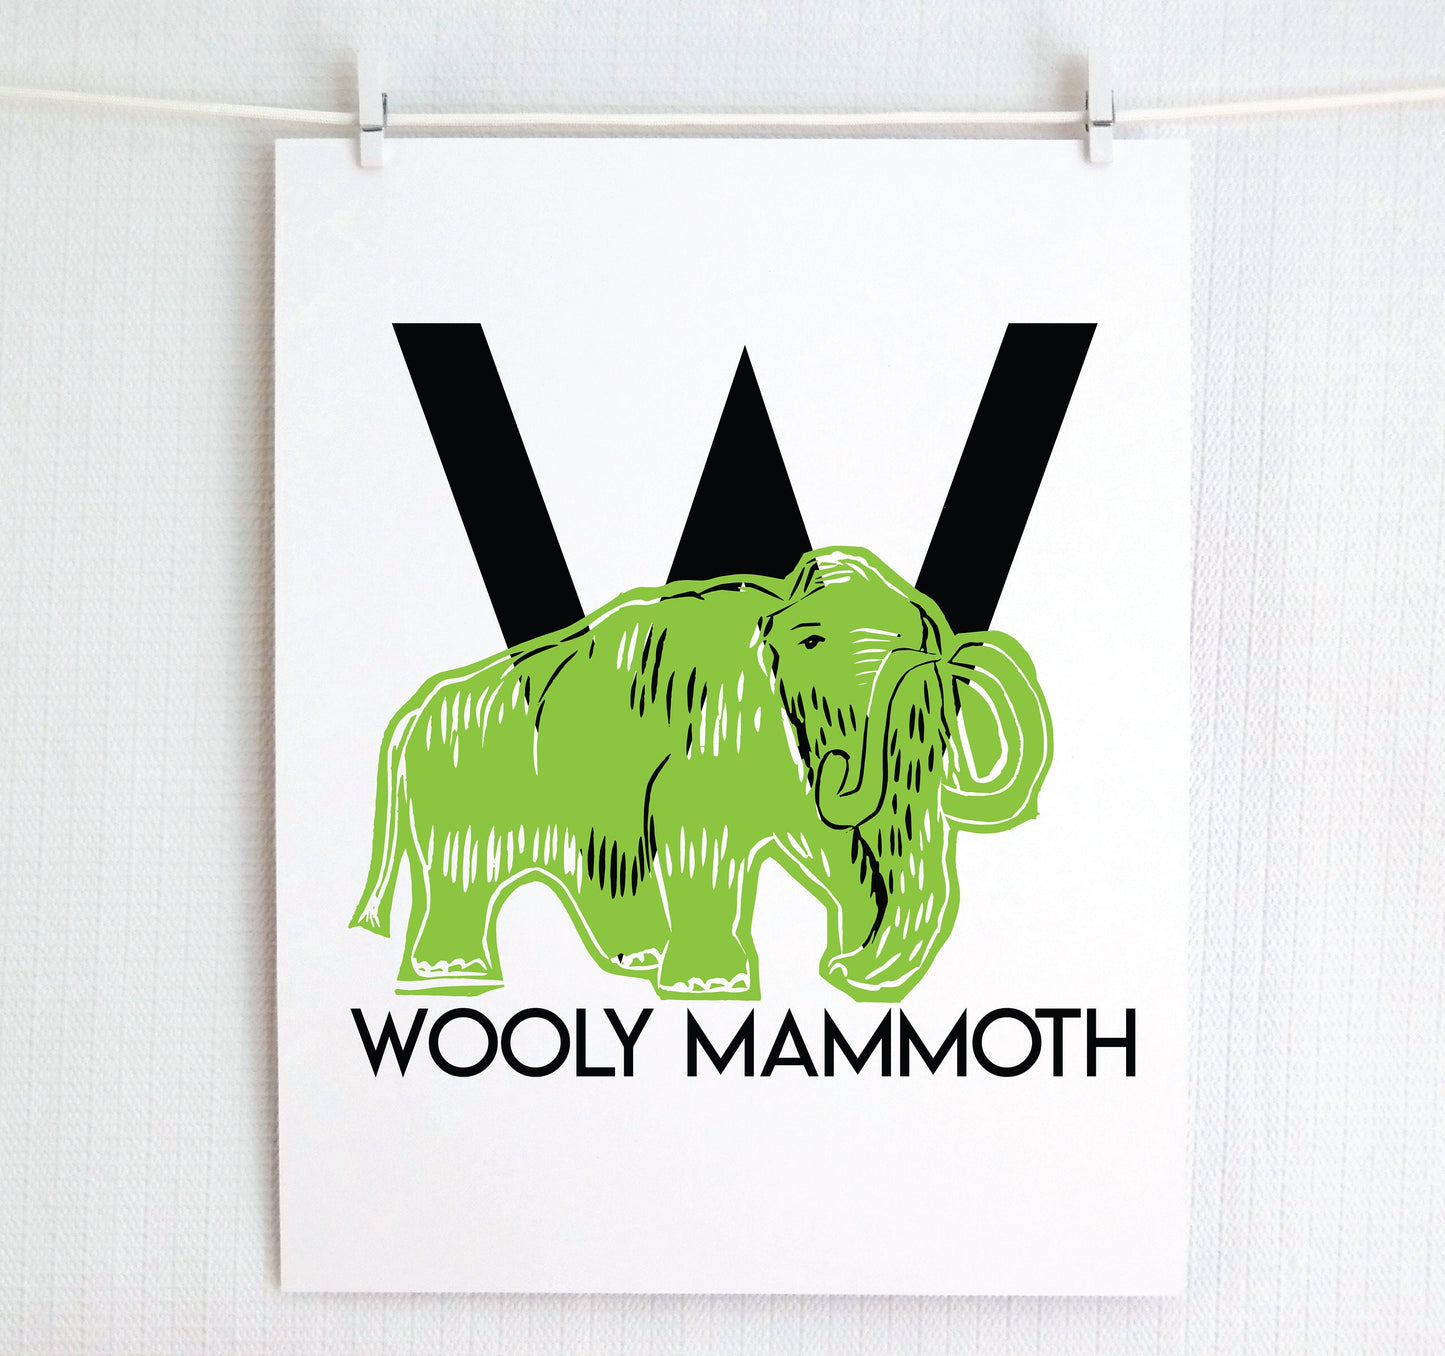 W is for Wooly Mammoth